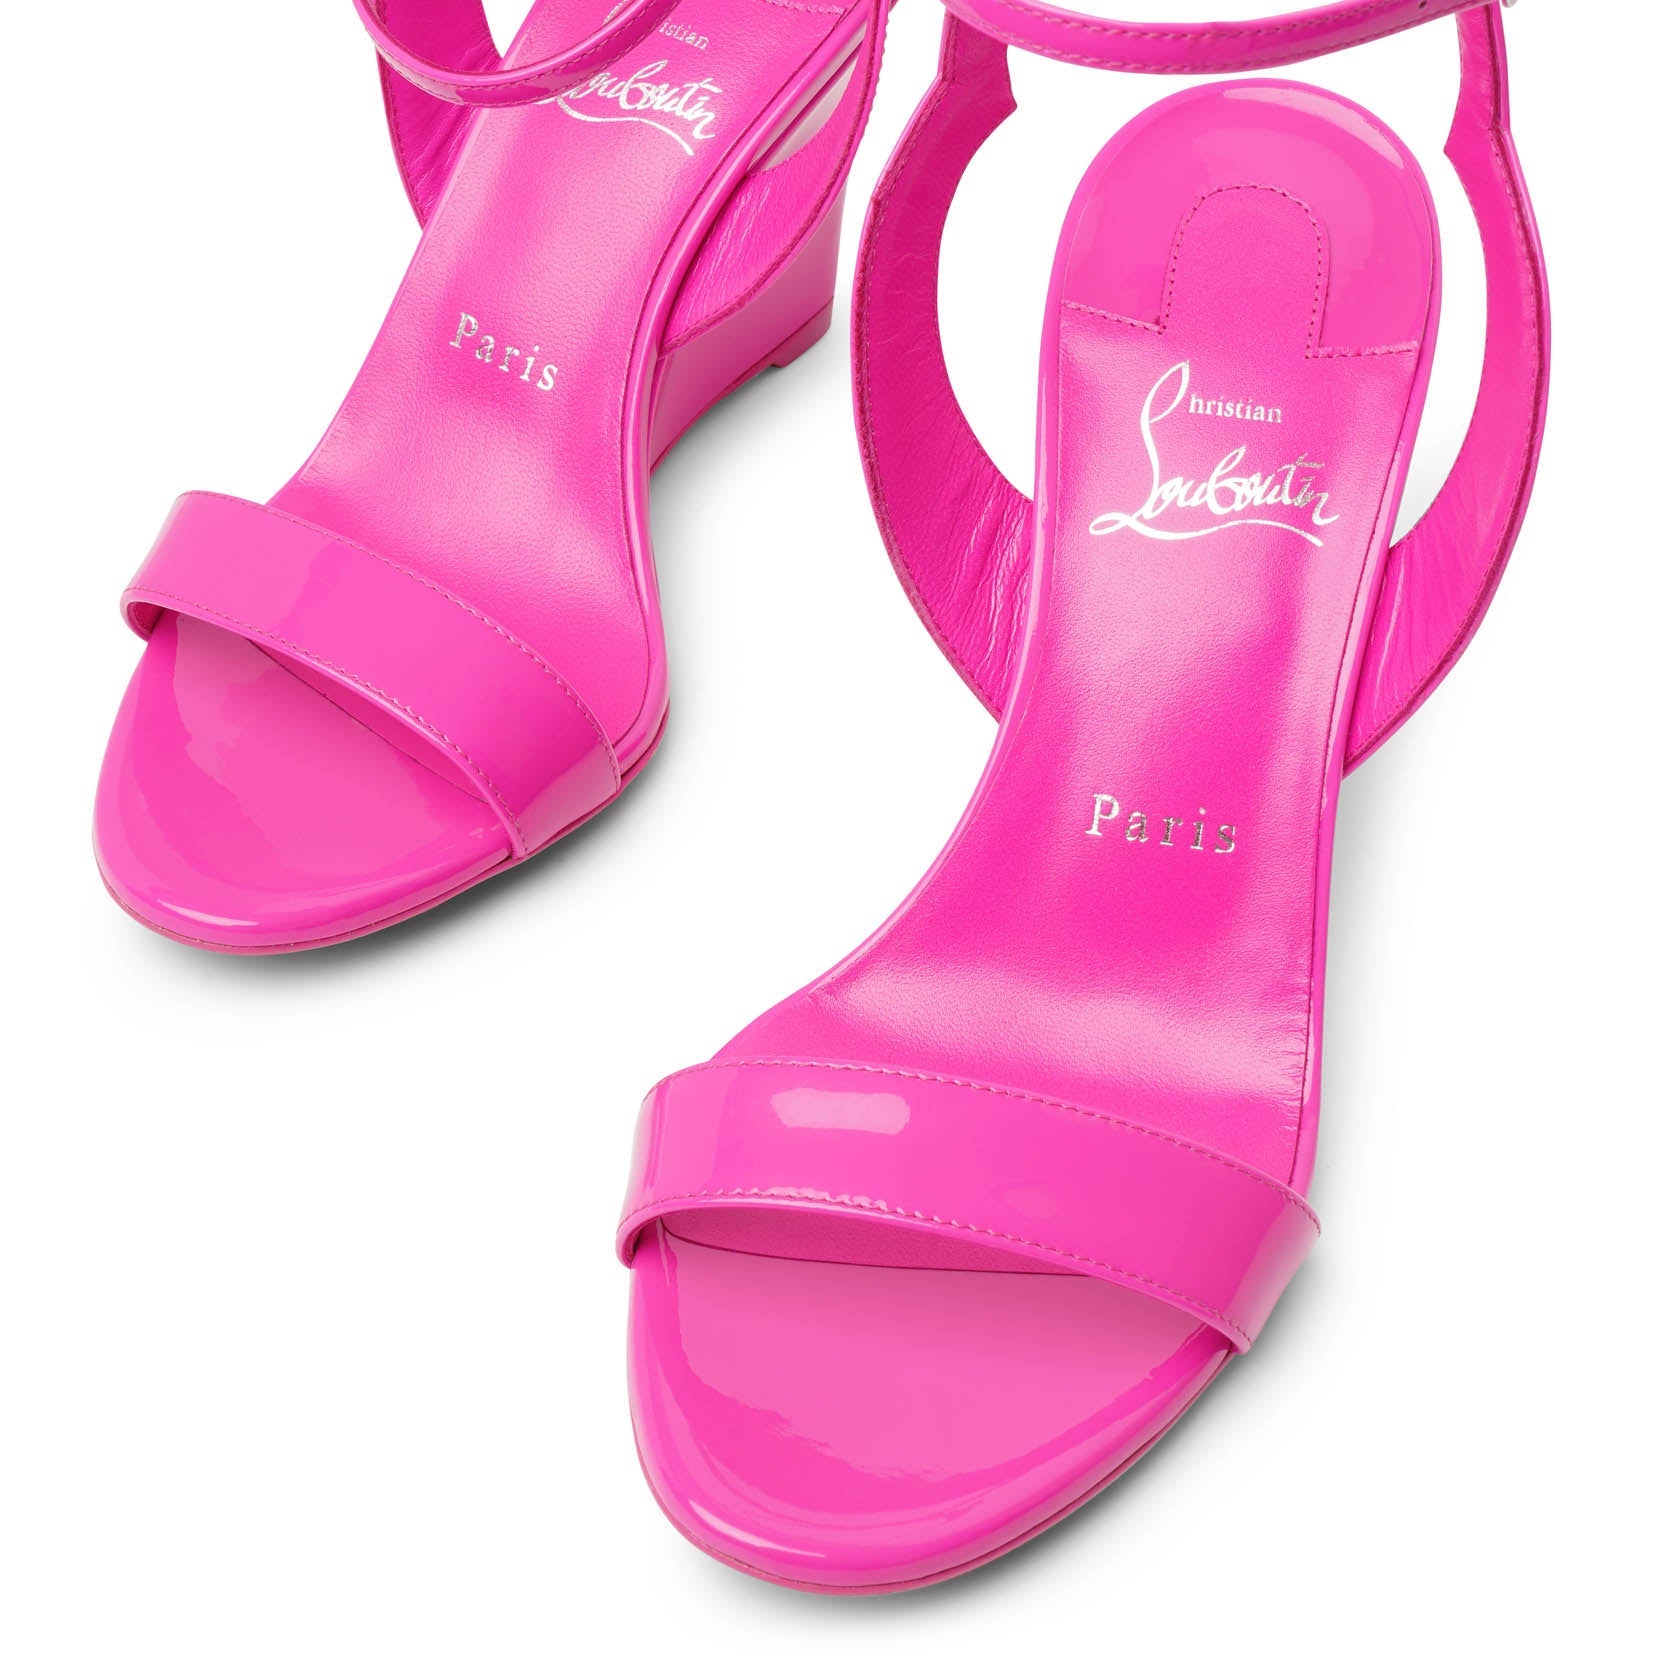 Zeppa Chick 85 pink patent wedge sandals